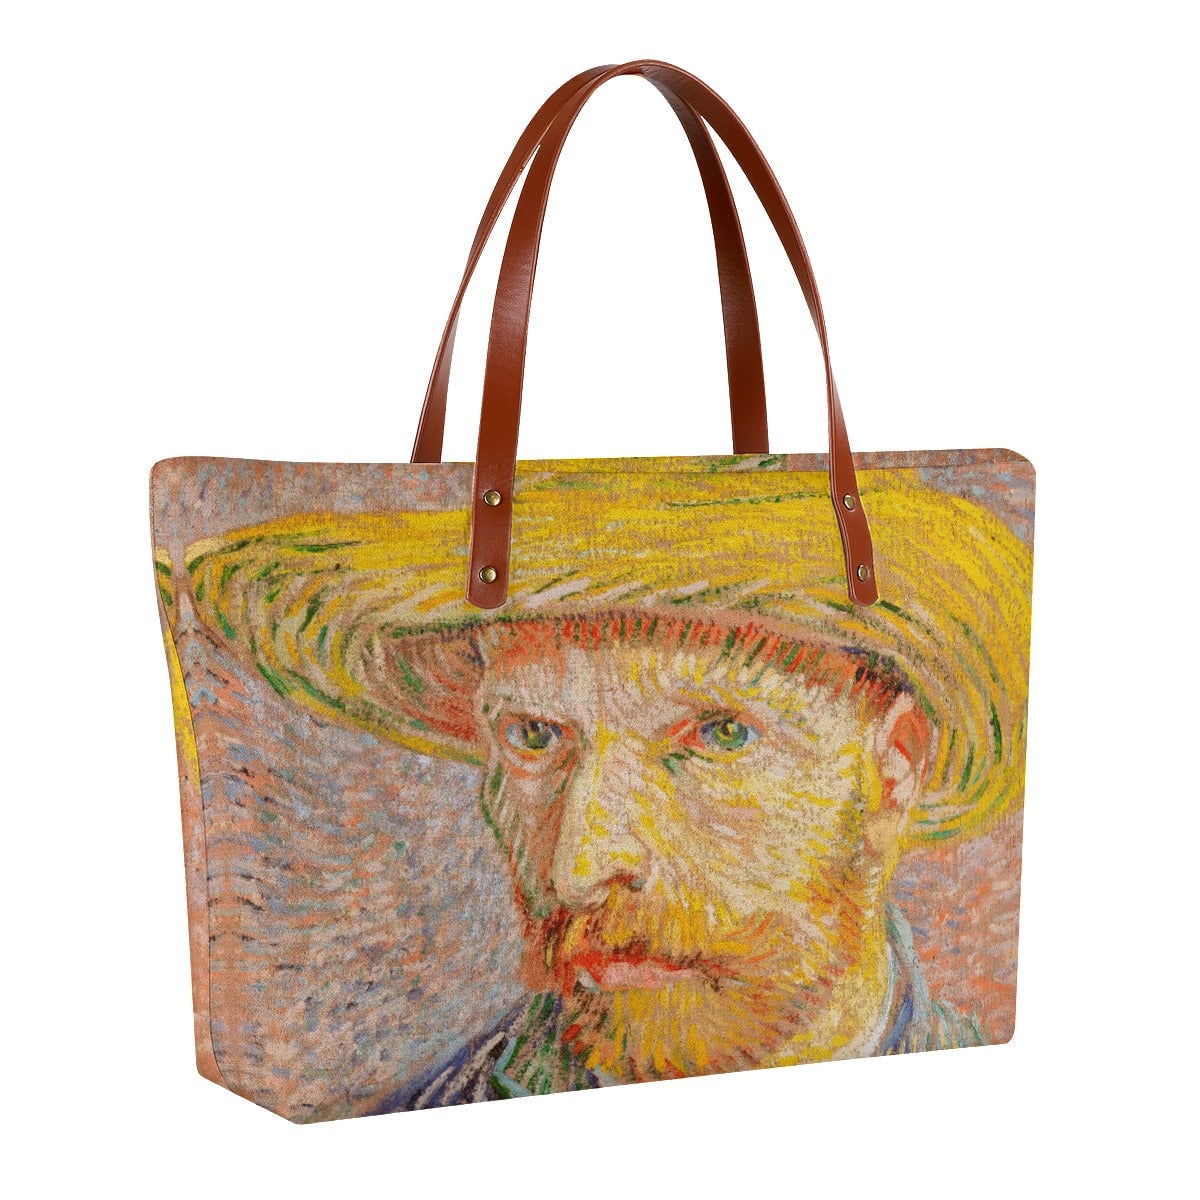 Self-Portrait with a Straw Hat Van Gogh Tote Bag